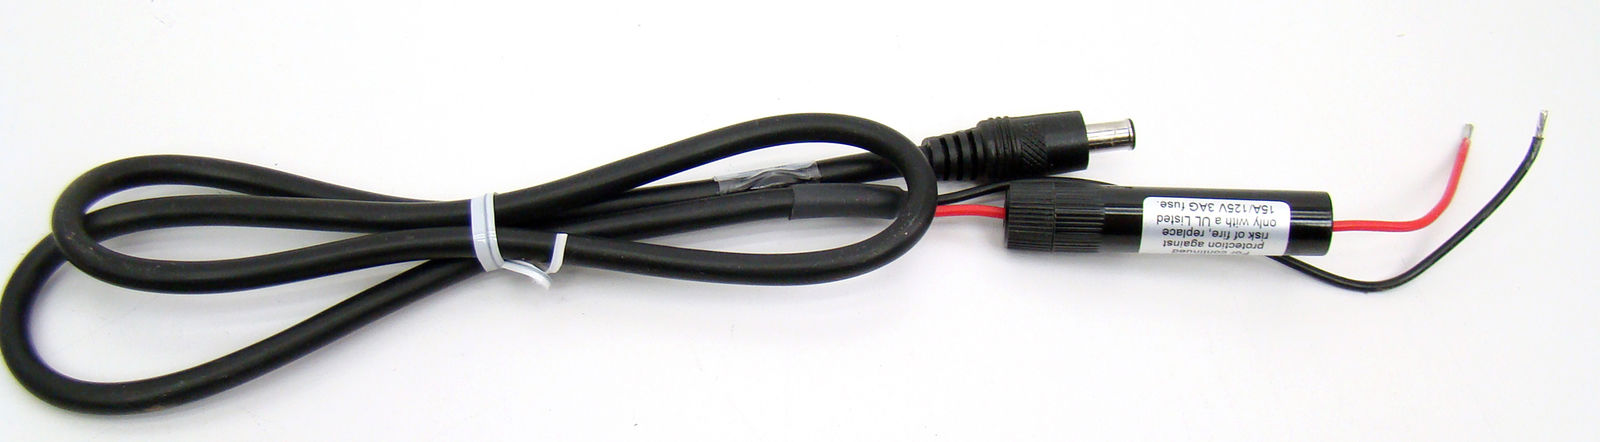 Lind Fused Power Cord, pigtail end, 3ft (LND3FPTN)